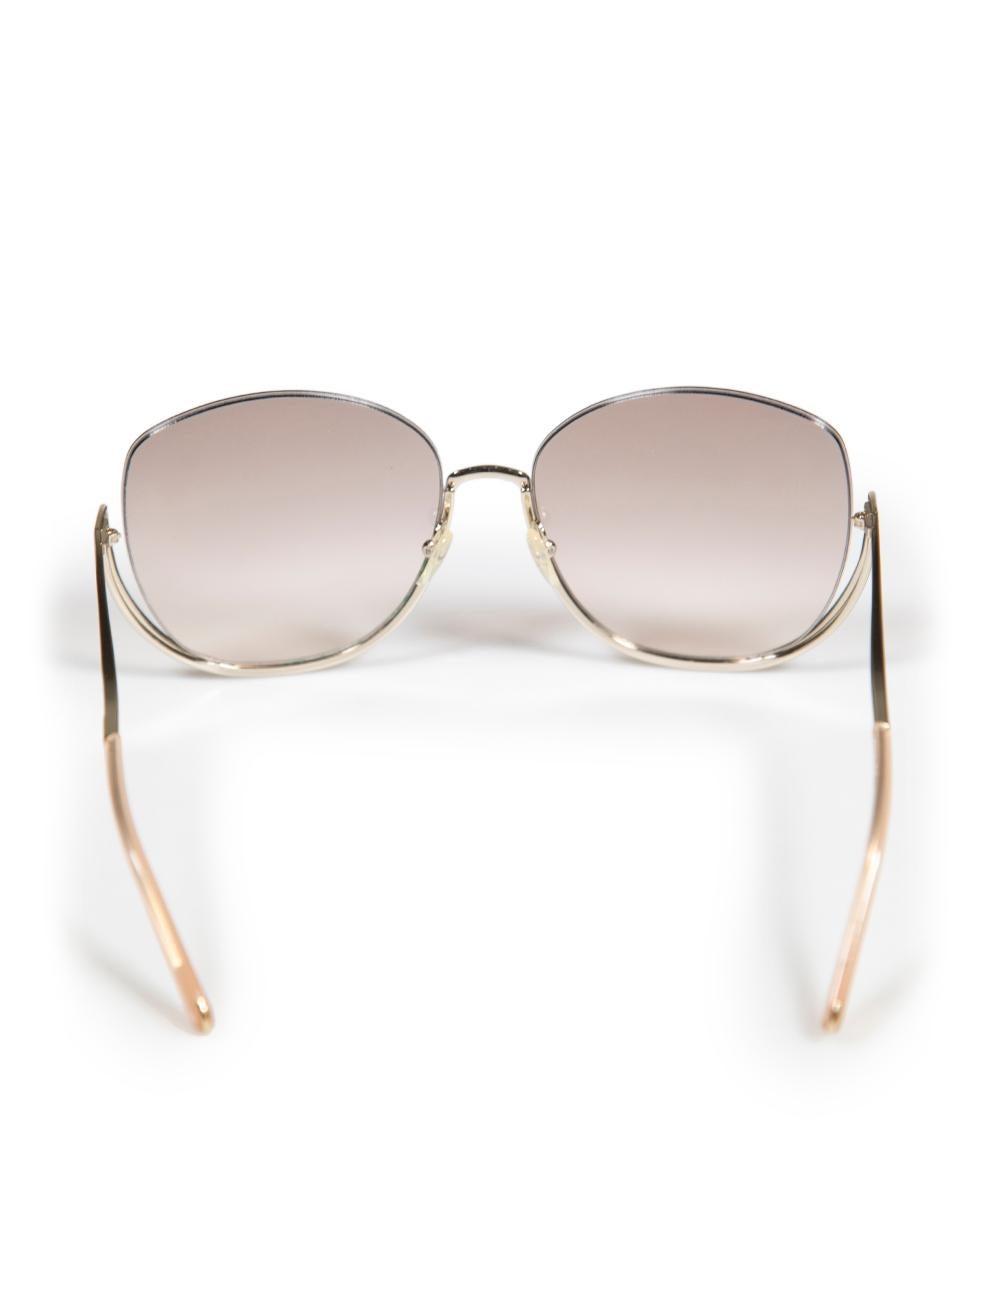 Chloé Silver Milla Oversized Round Sunglasses In Good Condition For Sale In London, GB